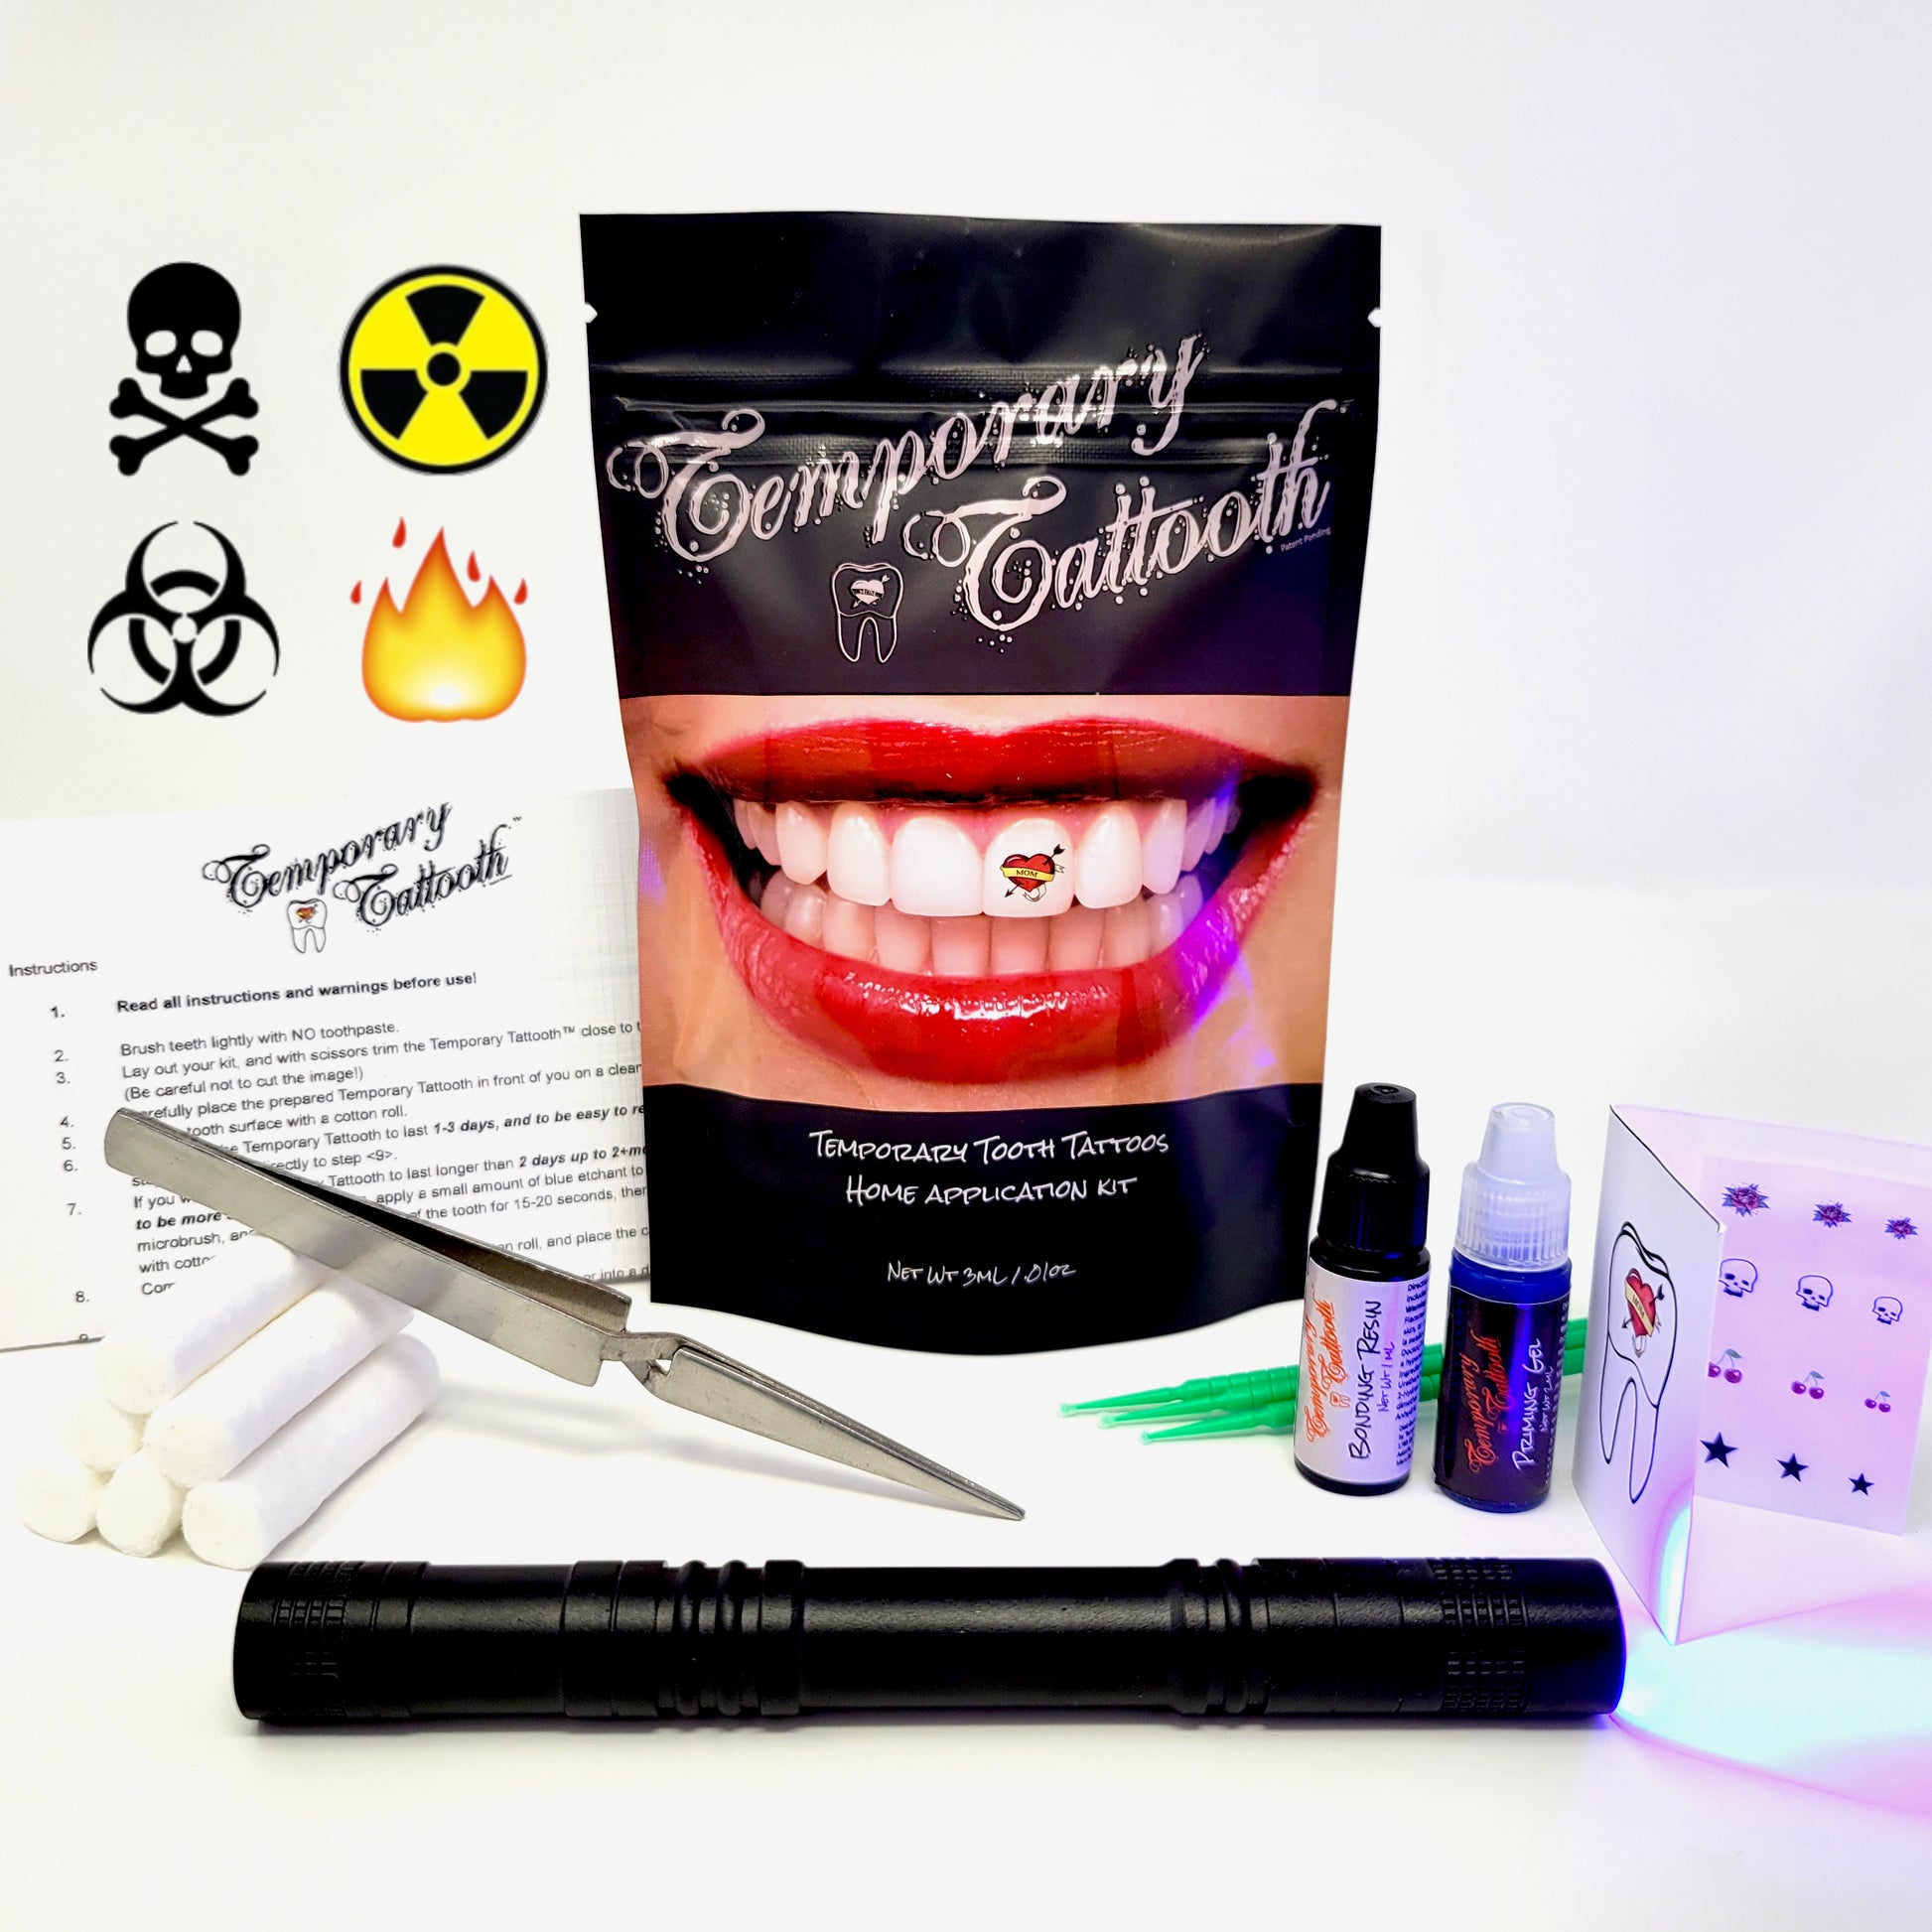 Temporary Tattooth Home Kit Skull Crossbones, Radioactive, Biohazard, Flame Option. These are images that can be applied as temporary tooth tattoos with the Temporary Tattooth Home Application Kit.